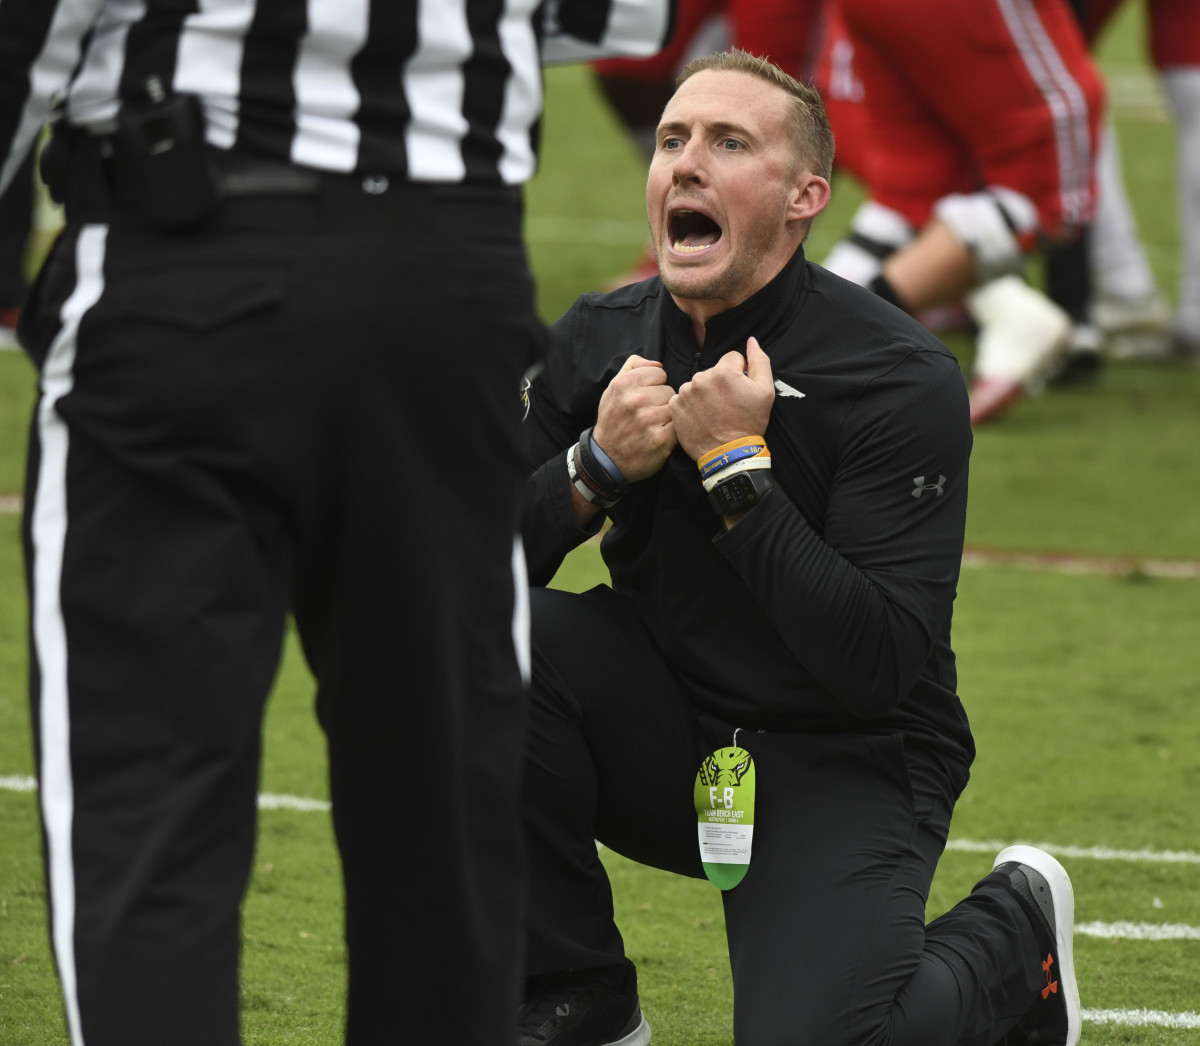 Austin Peay head coach Scotty Walden pleads for a call in the game with Alabama at Bryant-Denny Stadium.